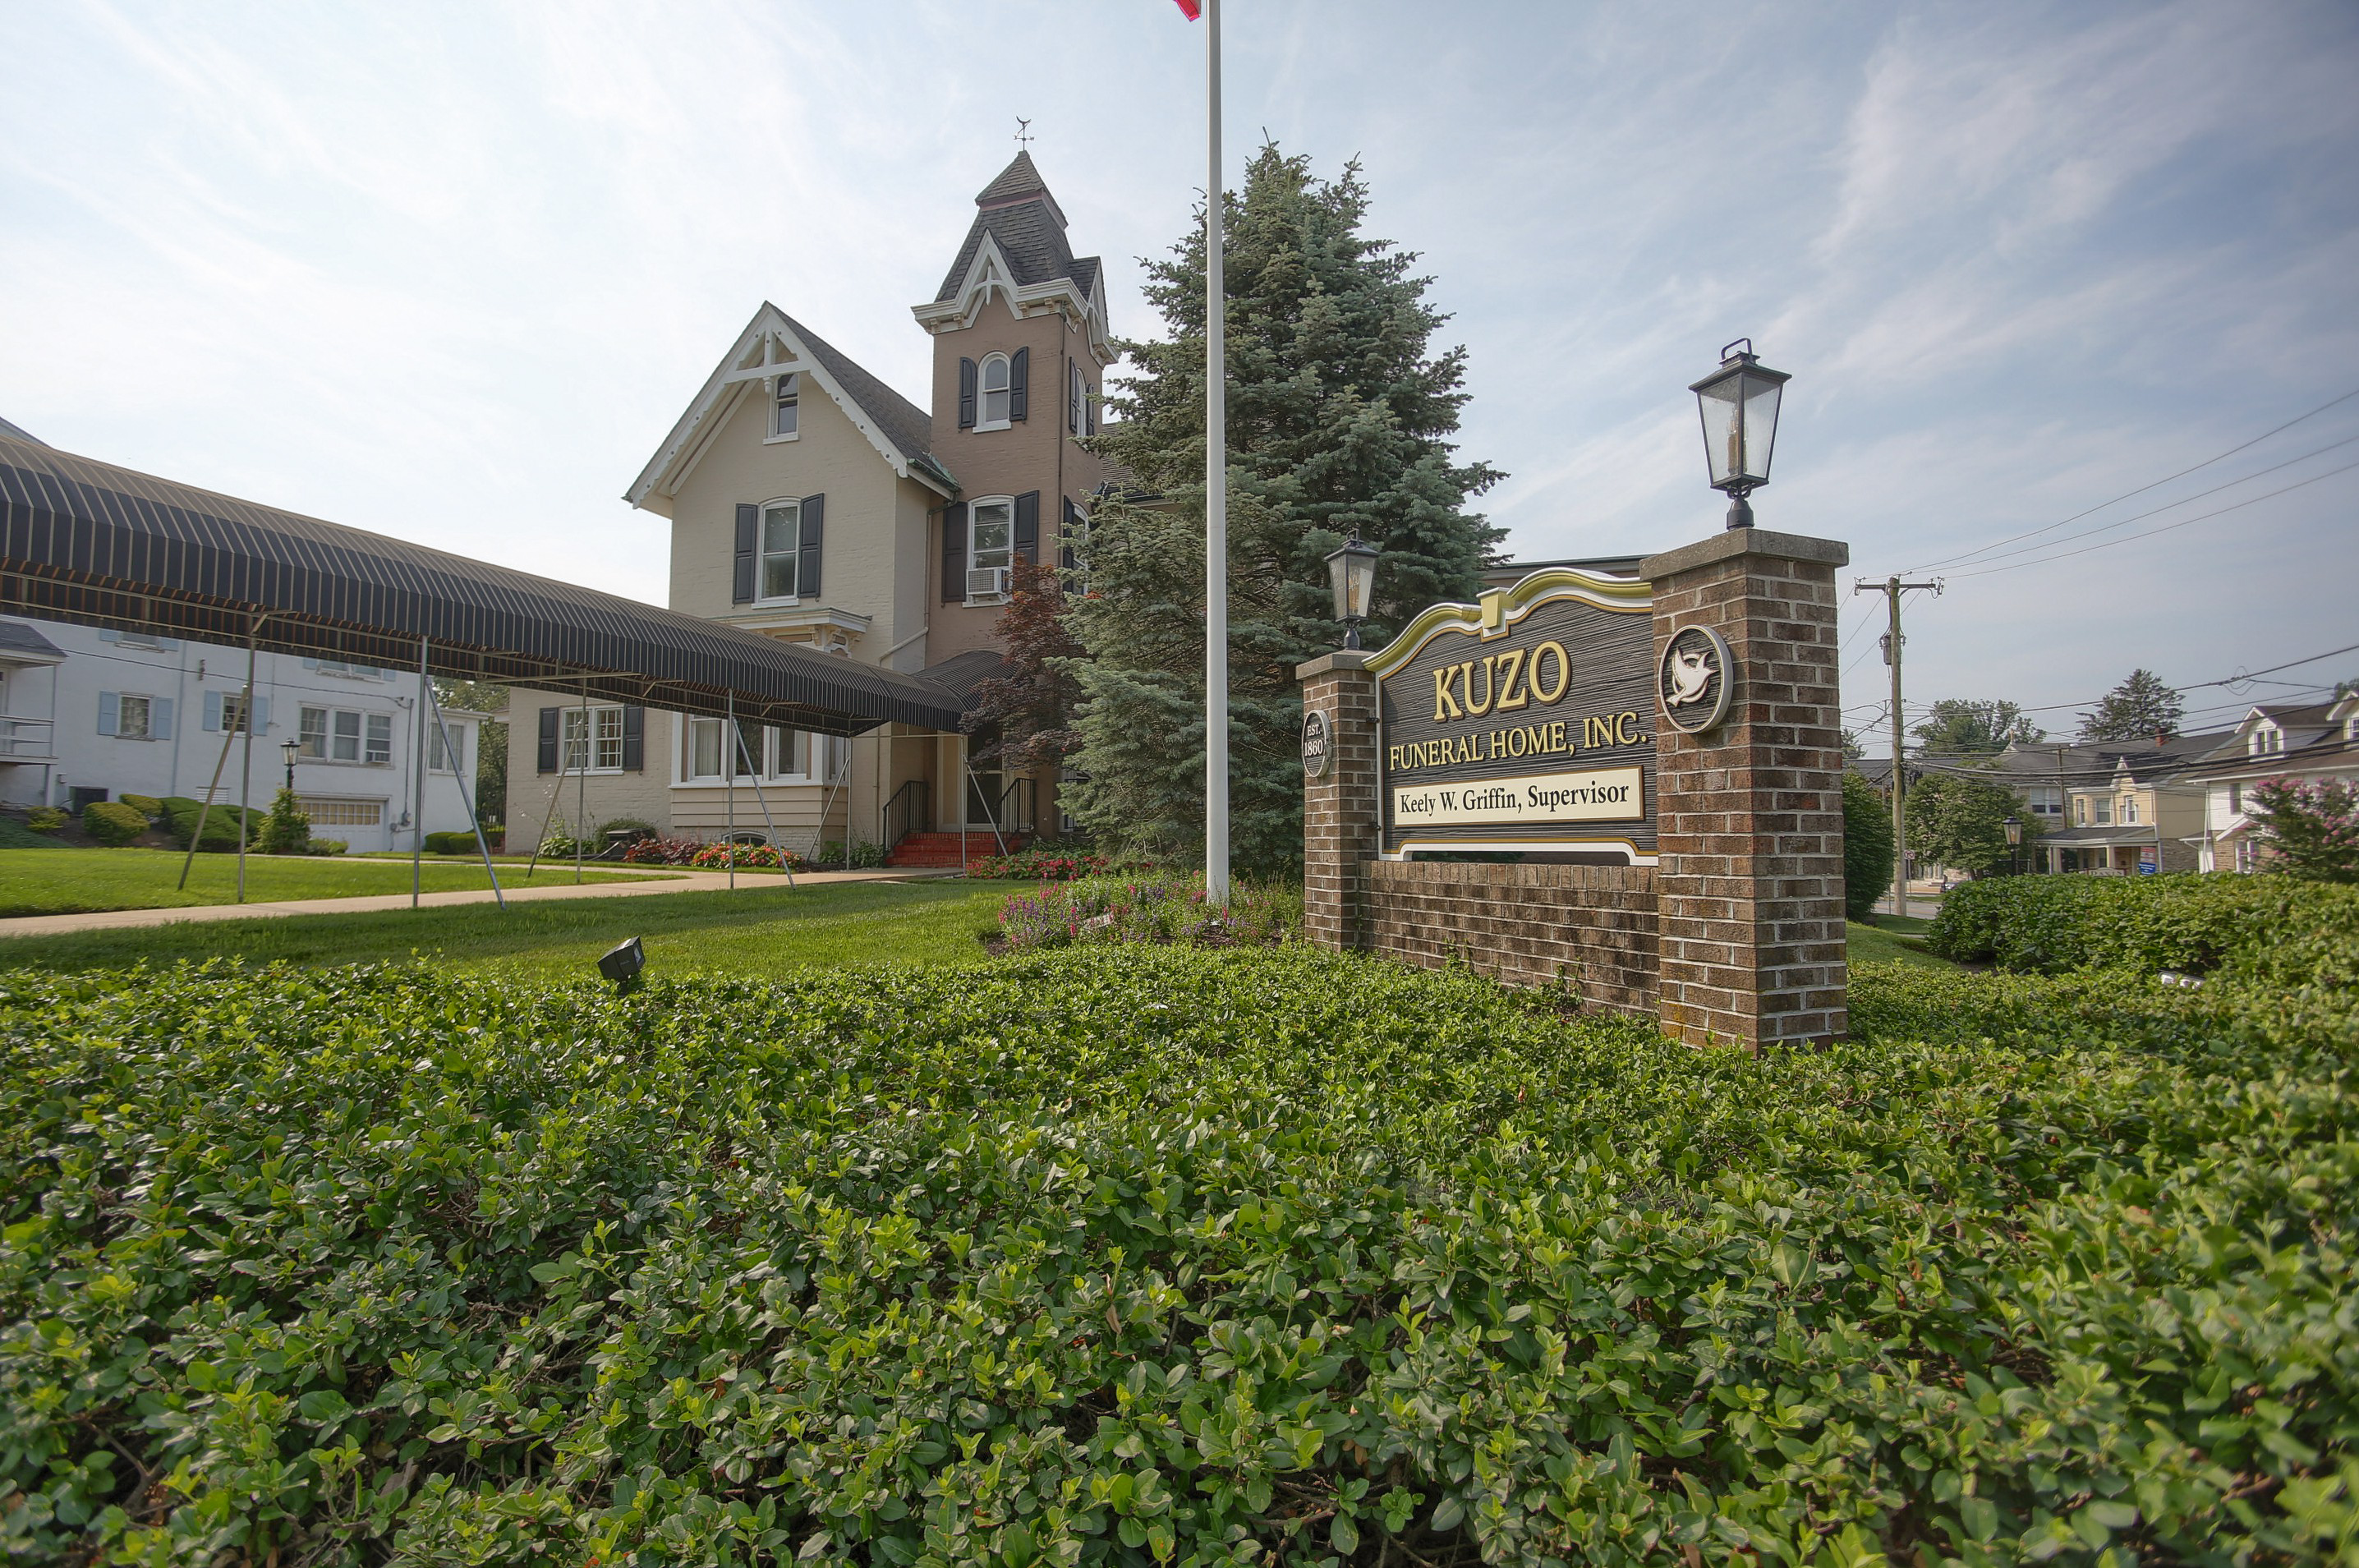 Our Kennett Square, PA Funeral Home